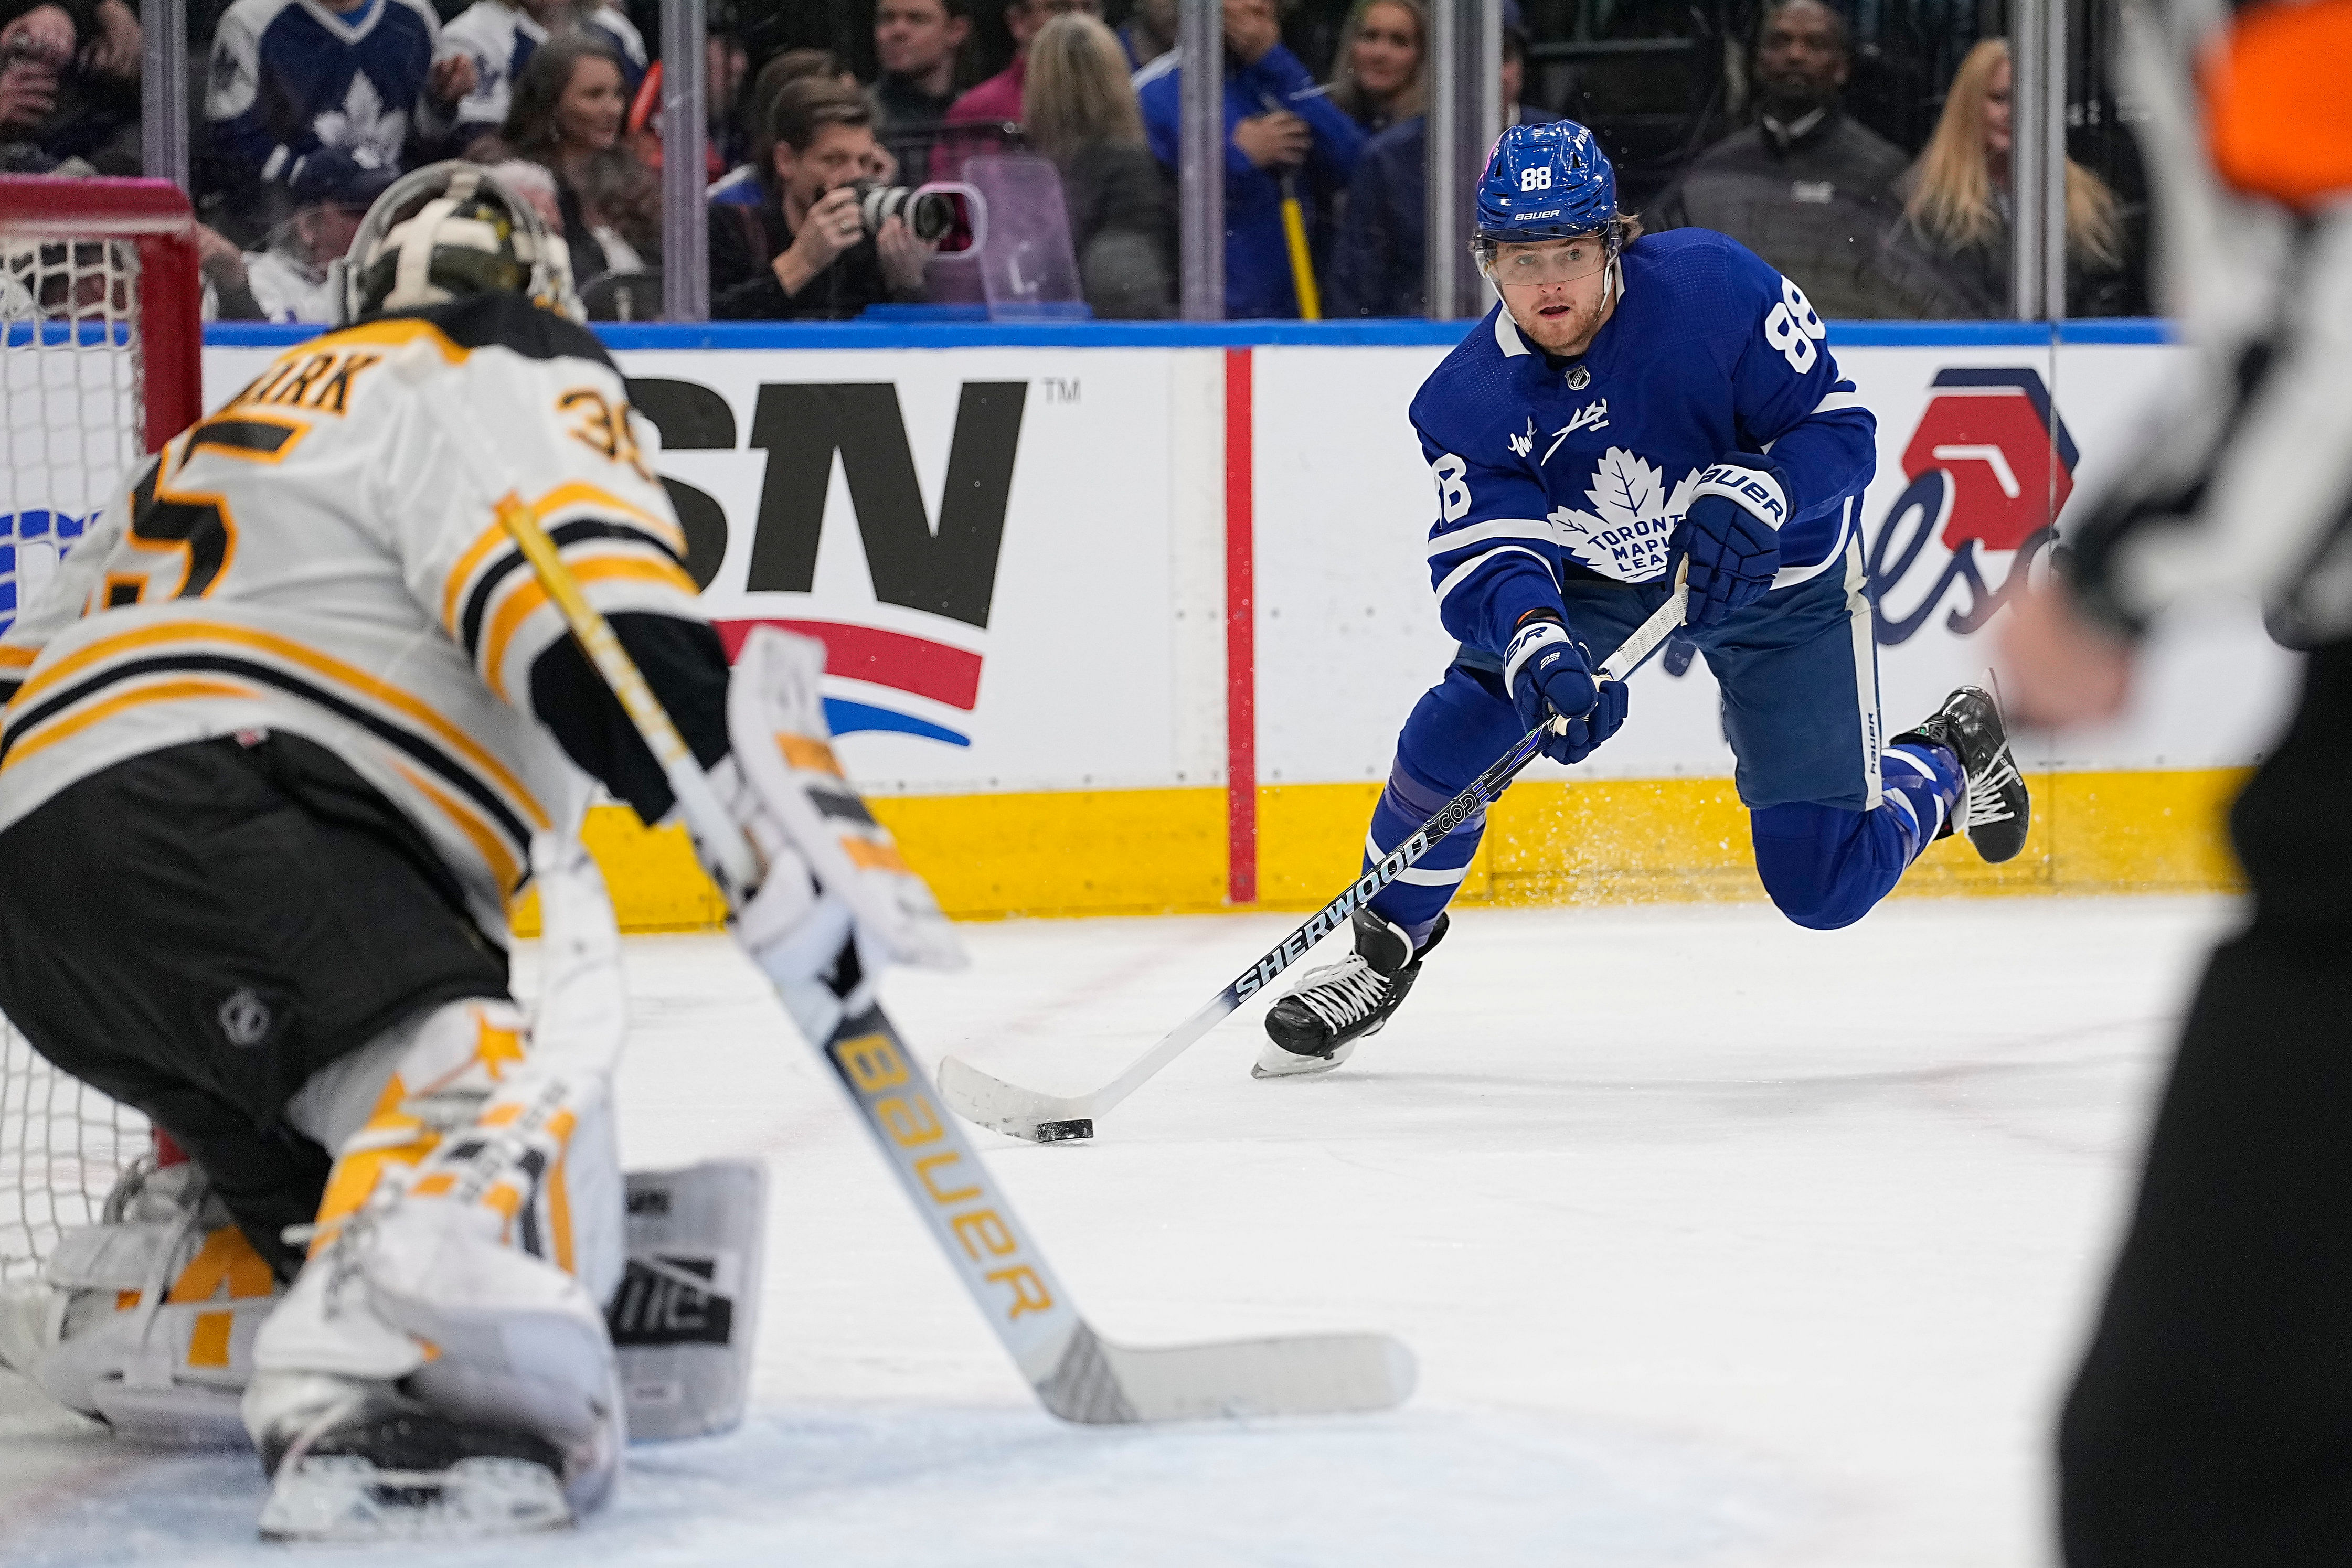 Toronto Maple Leafs forward William Nylander will look to be back for Game 3 against the Boston Bruins